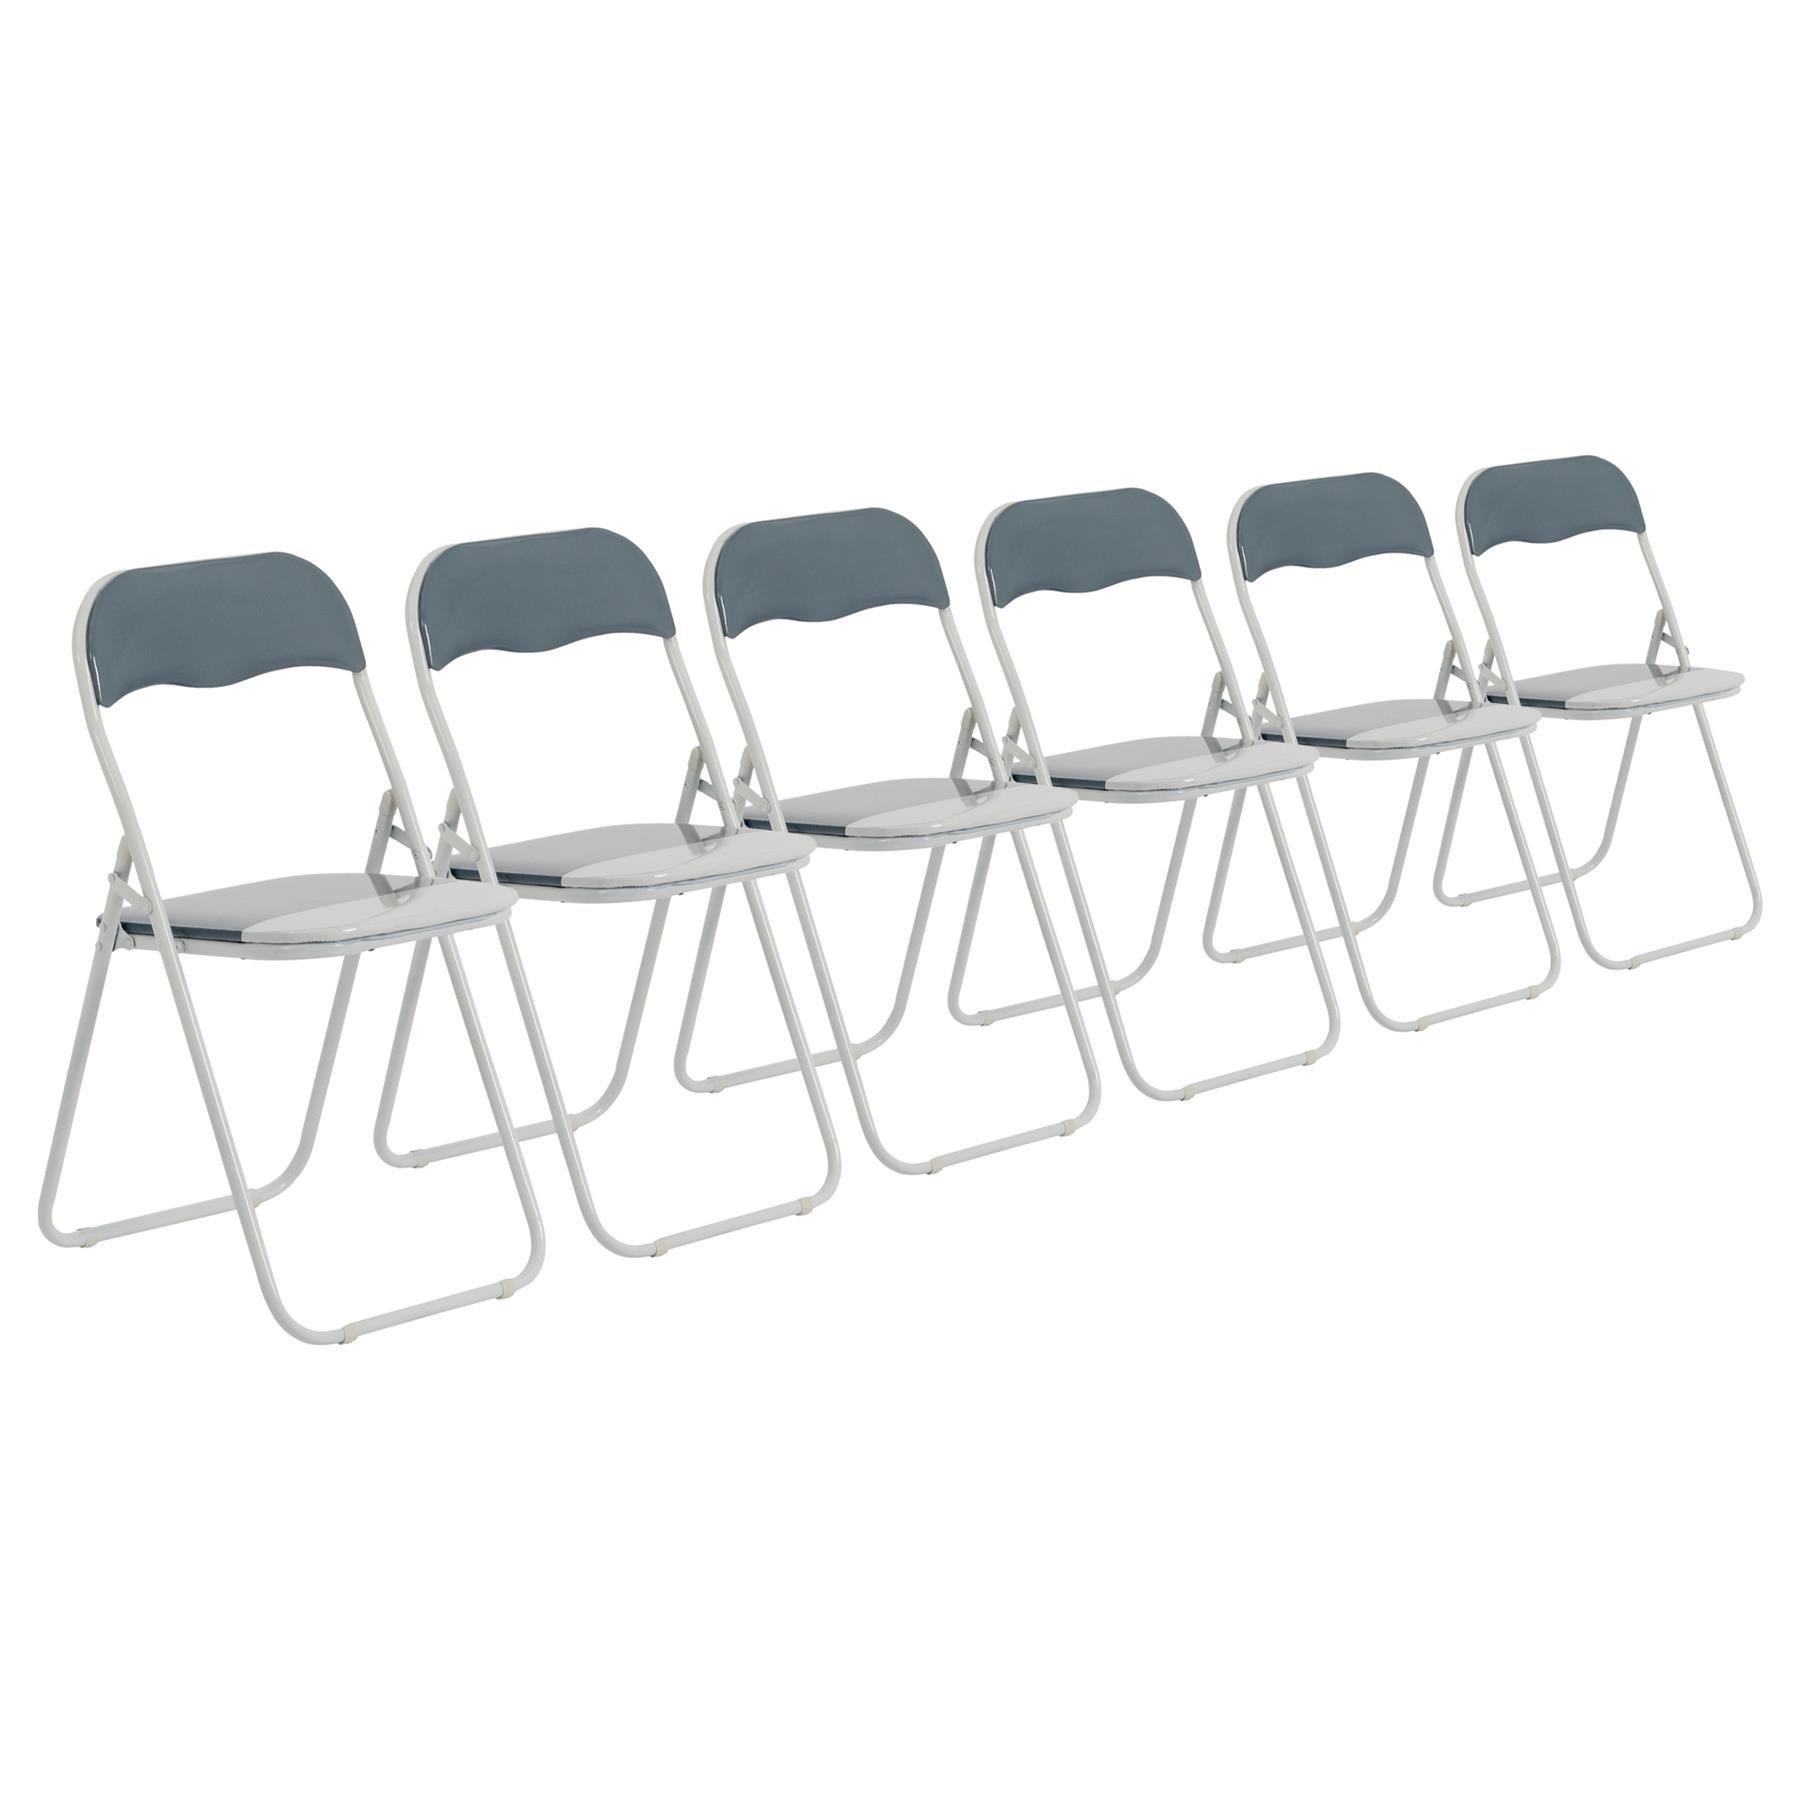 Coloured Padded Folding Chairs Pack of 6